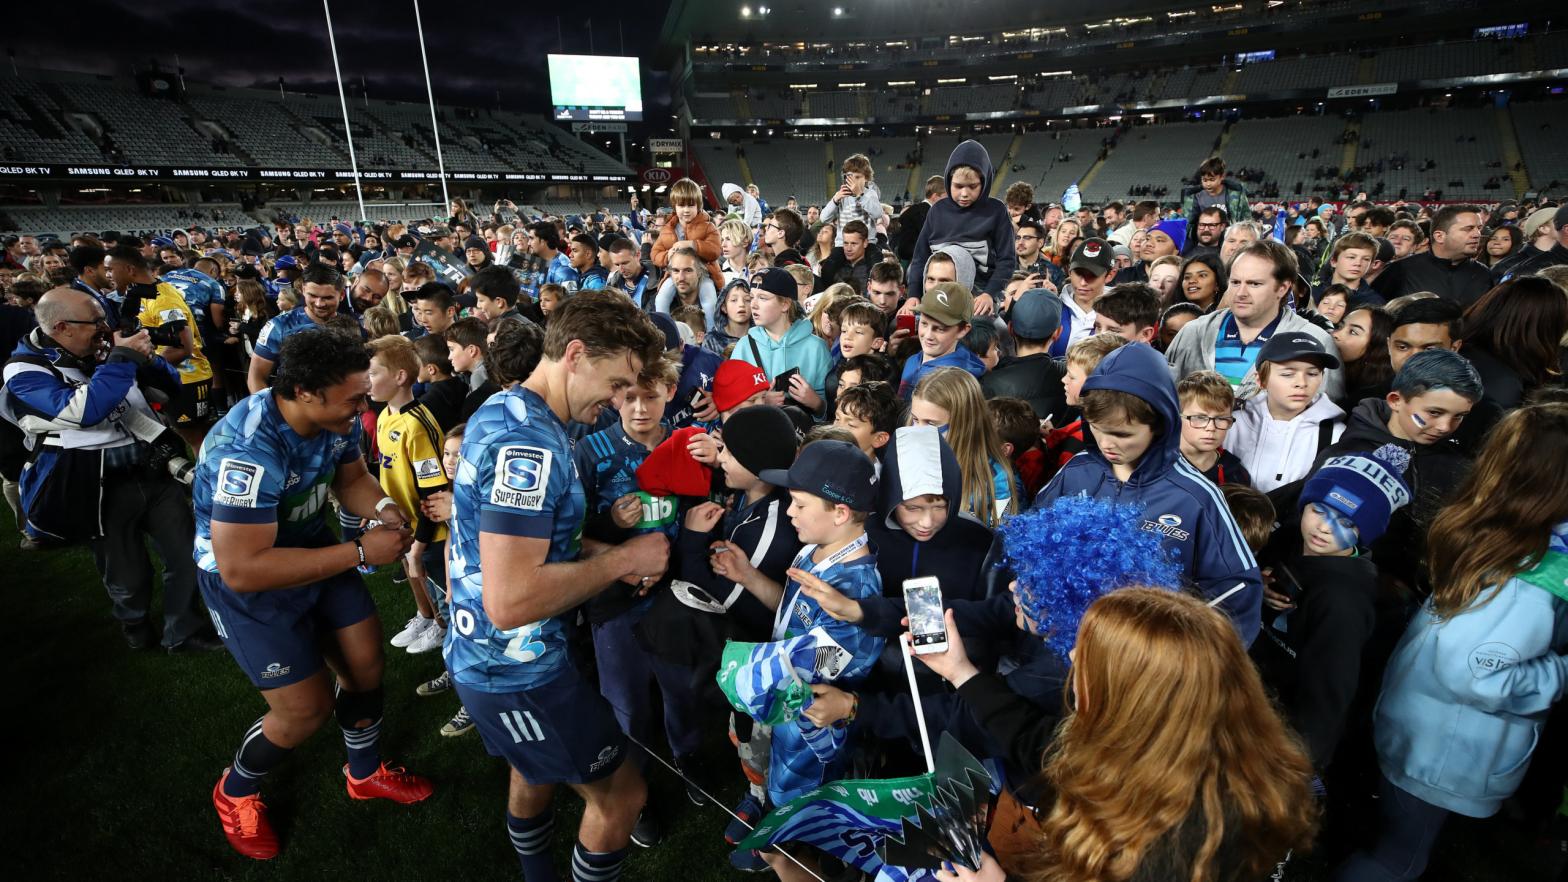 Life returns to normal in New Zealand without need for social distancing, as a crowd comes onto the field to get player autographs during round 1 of the Super Rugby Aotearoa match between the Blues and the Hurricanes at Eden Park on June 14, 2020 in Auckland, New Zealand.  (Photo: Phil Walter, Getty Images)